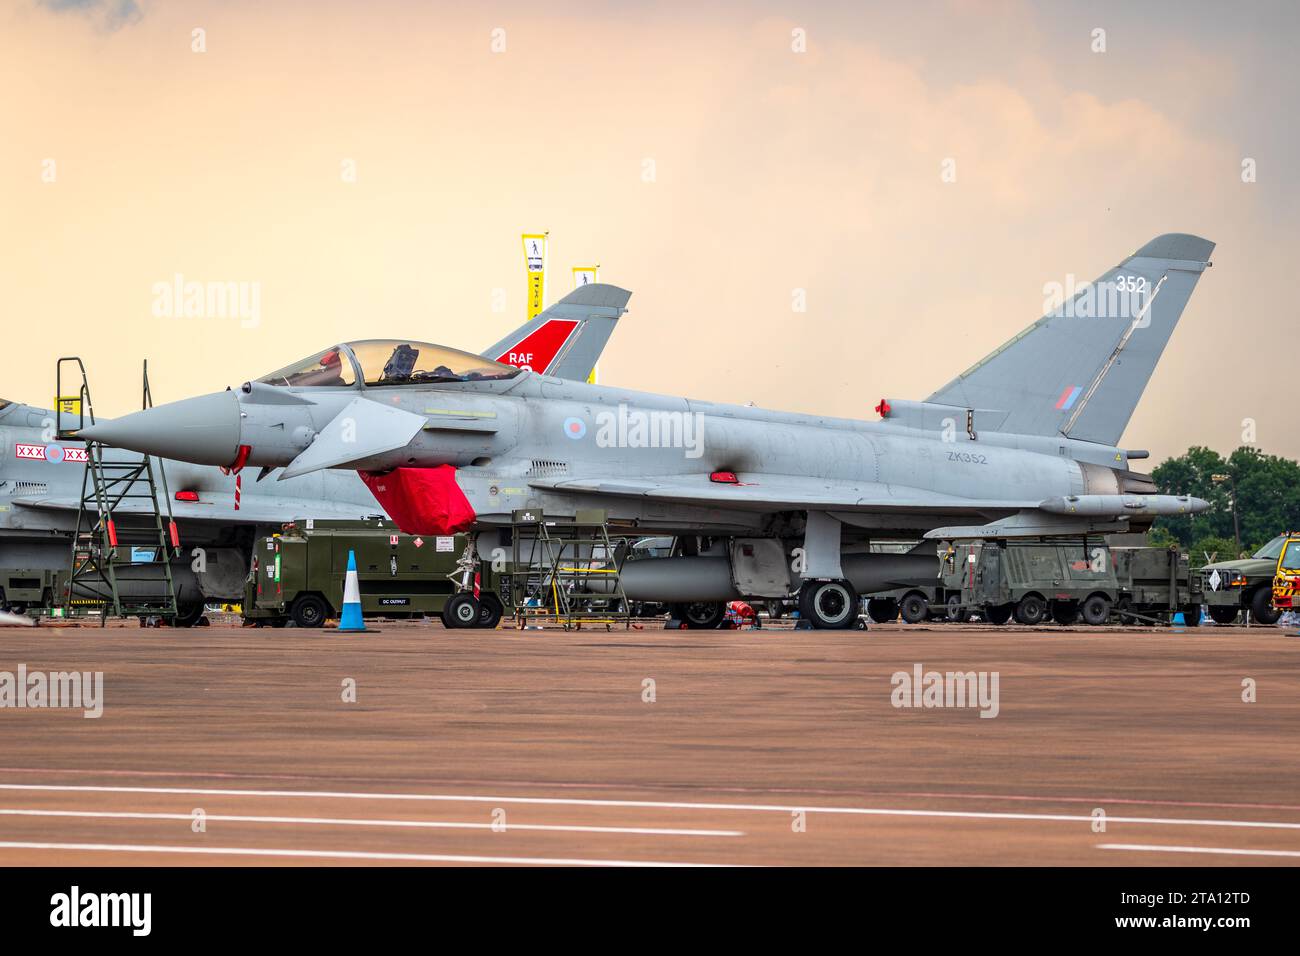 Royal Air Force (RAF) Eurofighter Typhoon on the tarmac of Fairford Air Base. Gloucestershire, UK - July 13, 2018 Stock Photo